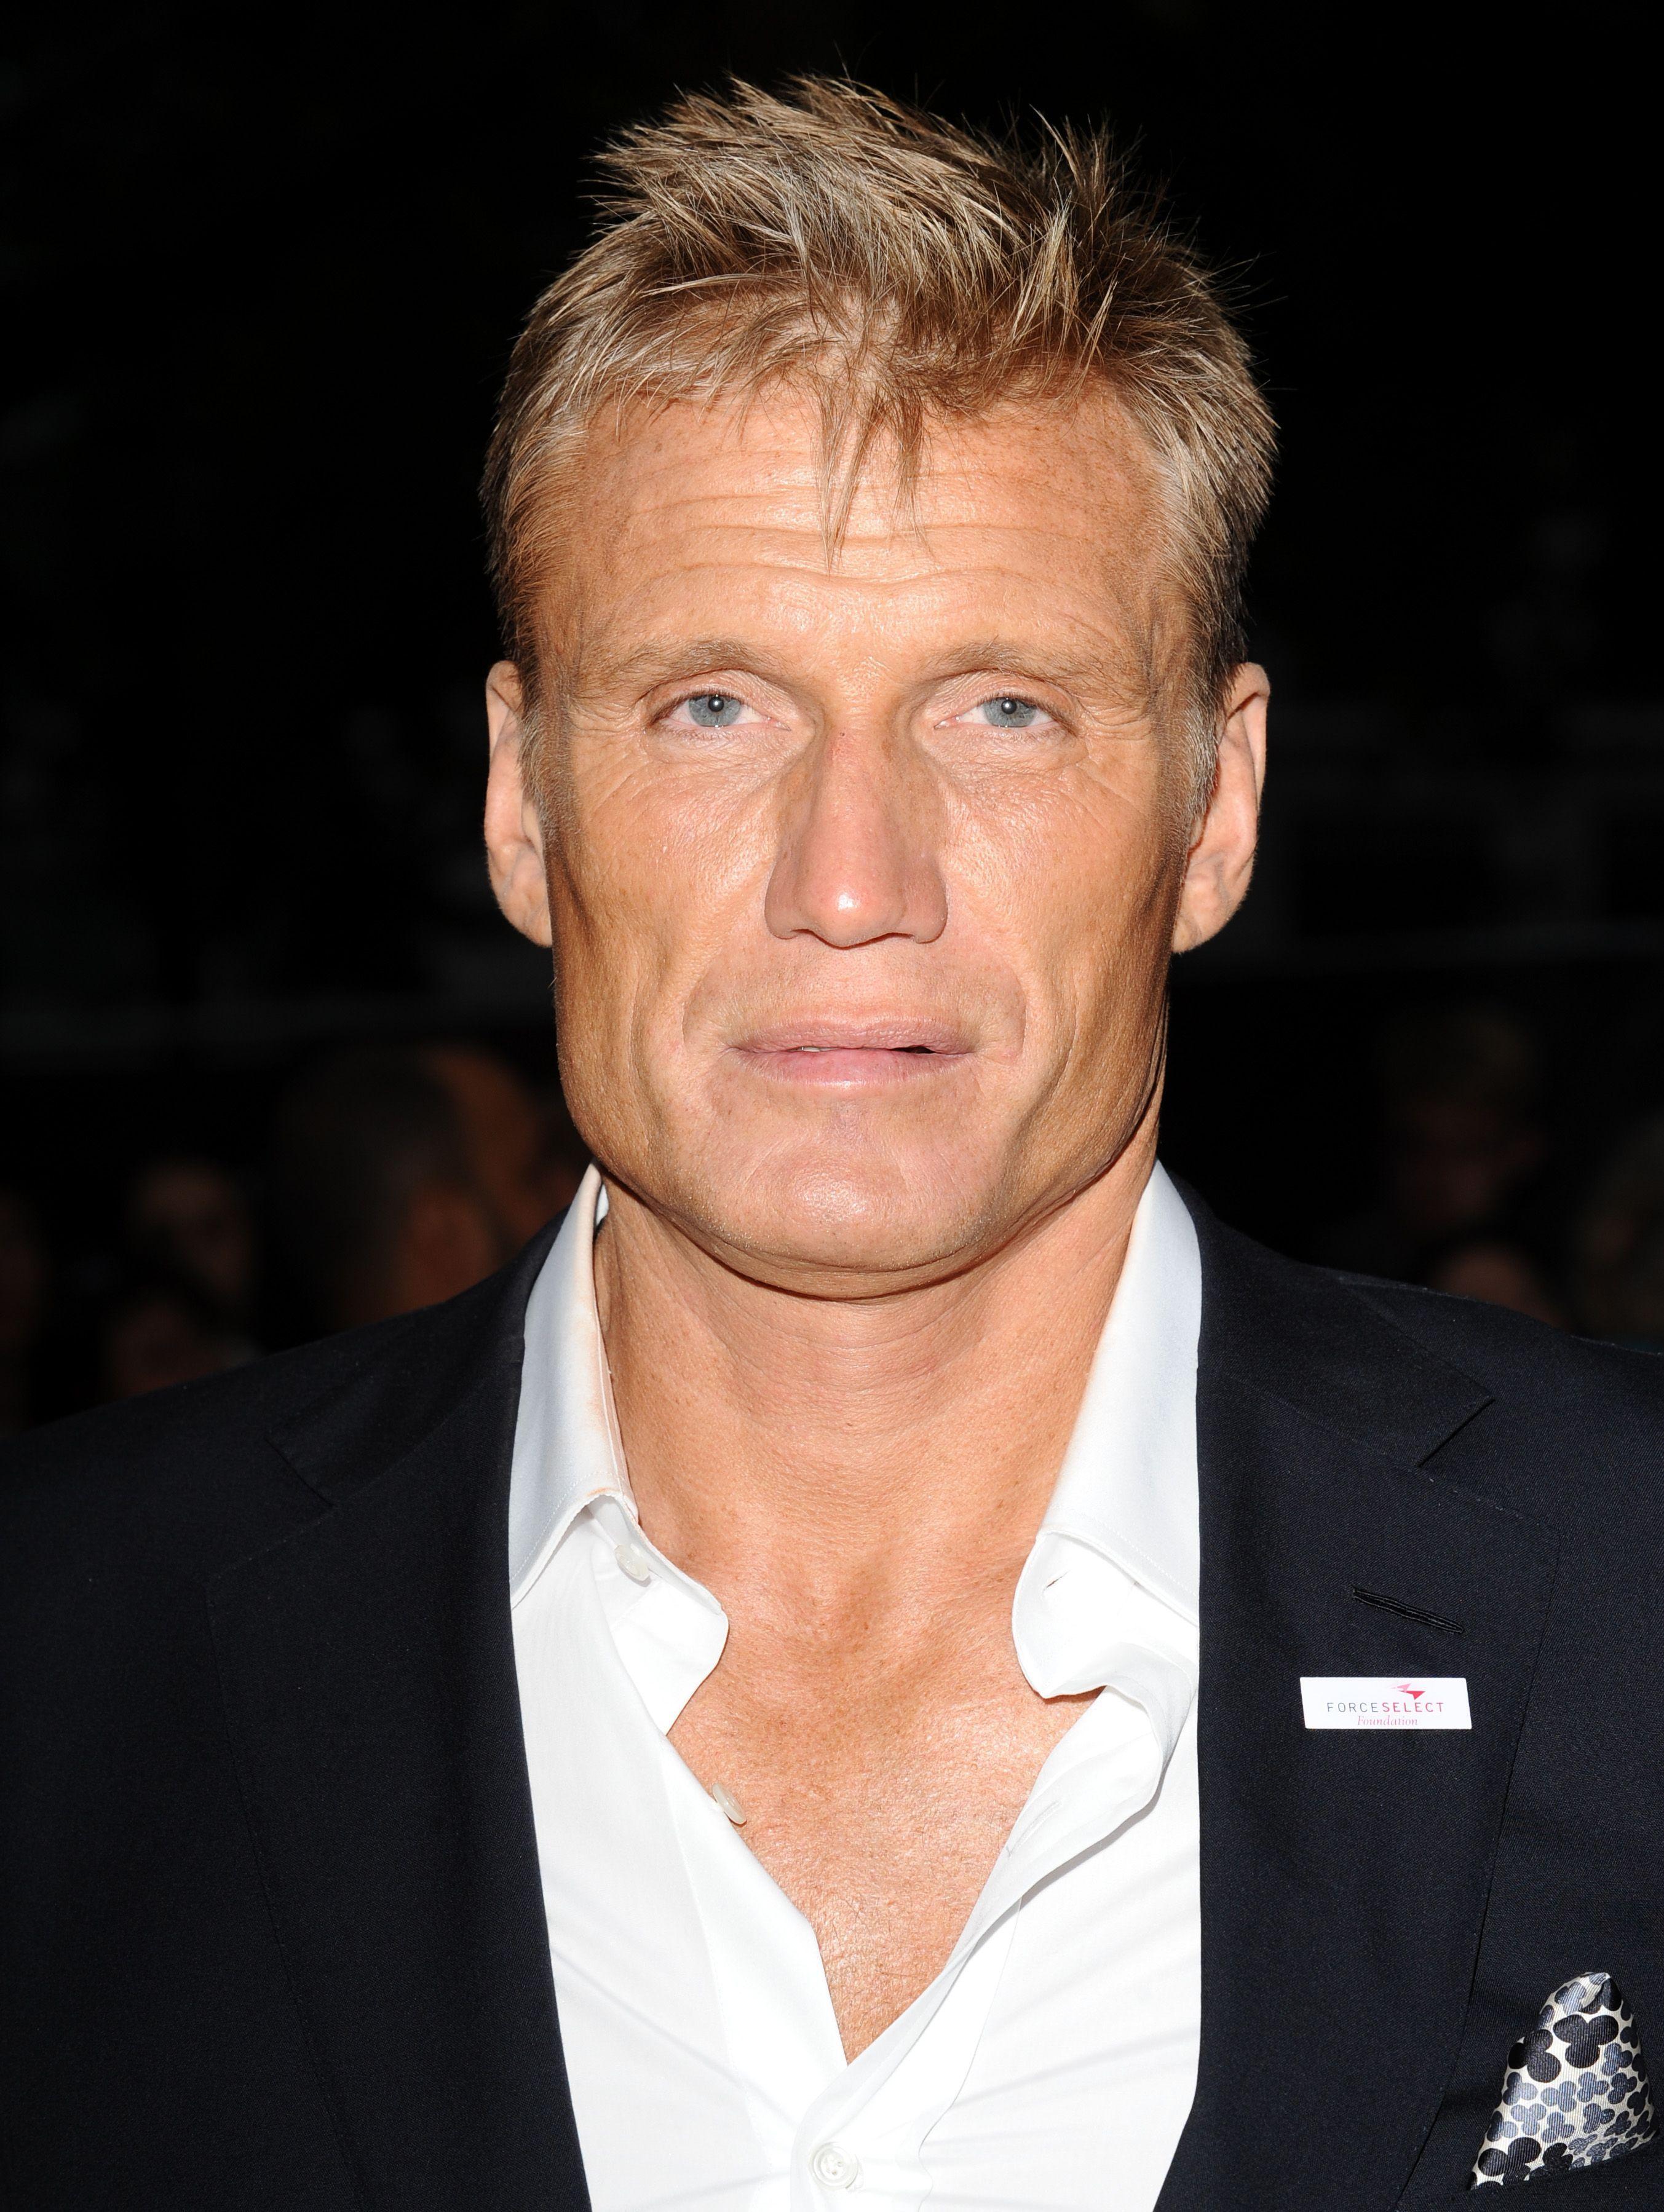 Dolph Lundgren's 56 has an I.Q. over 160!. Dolph